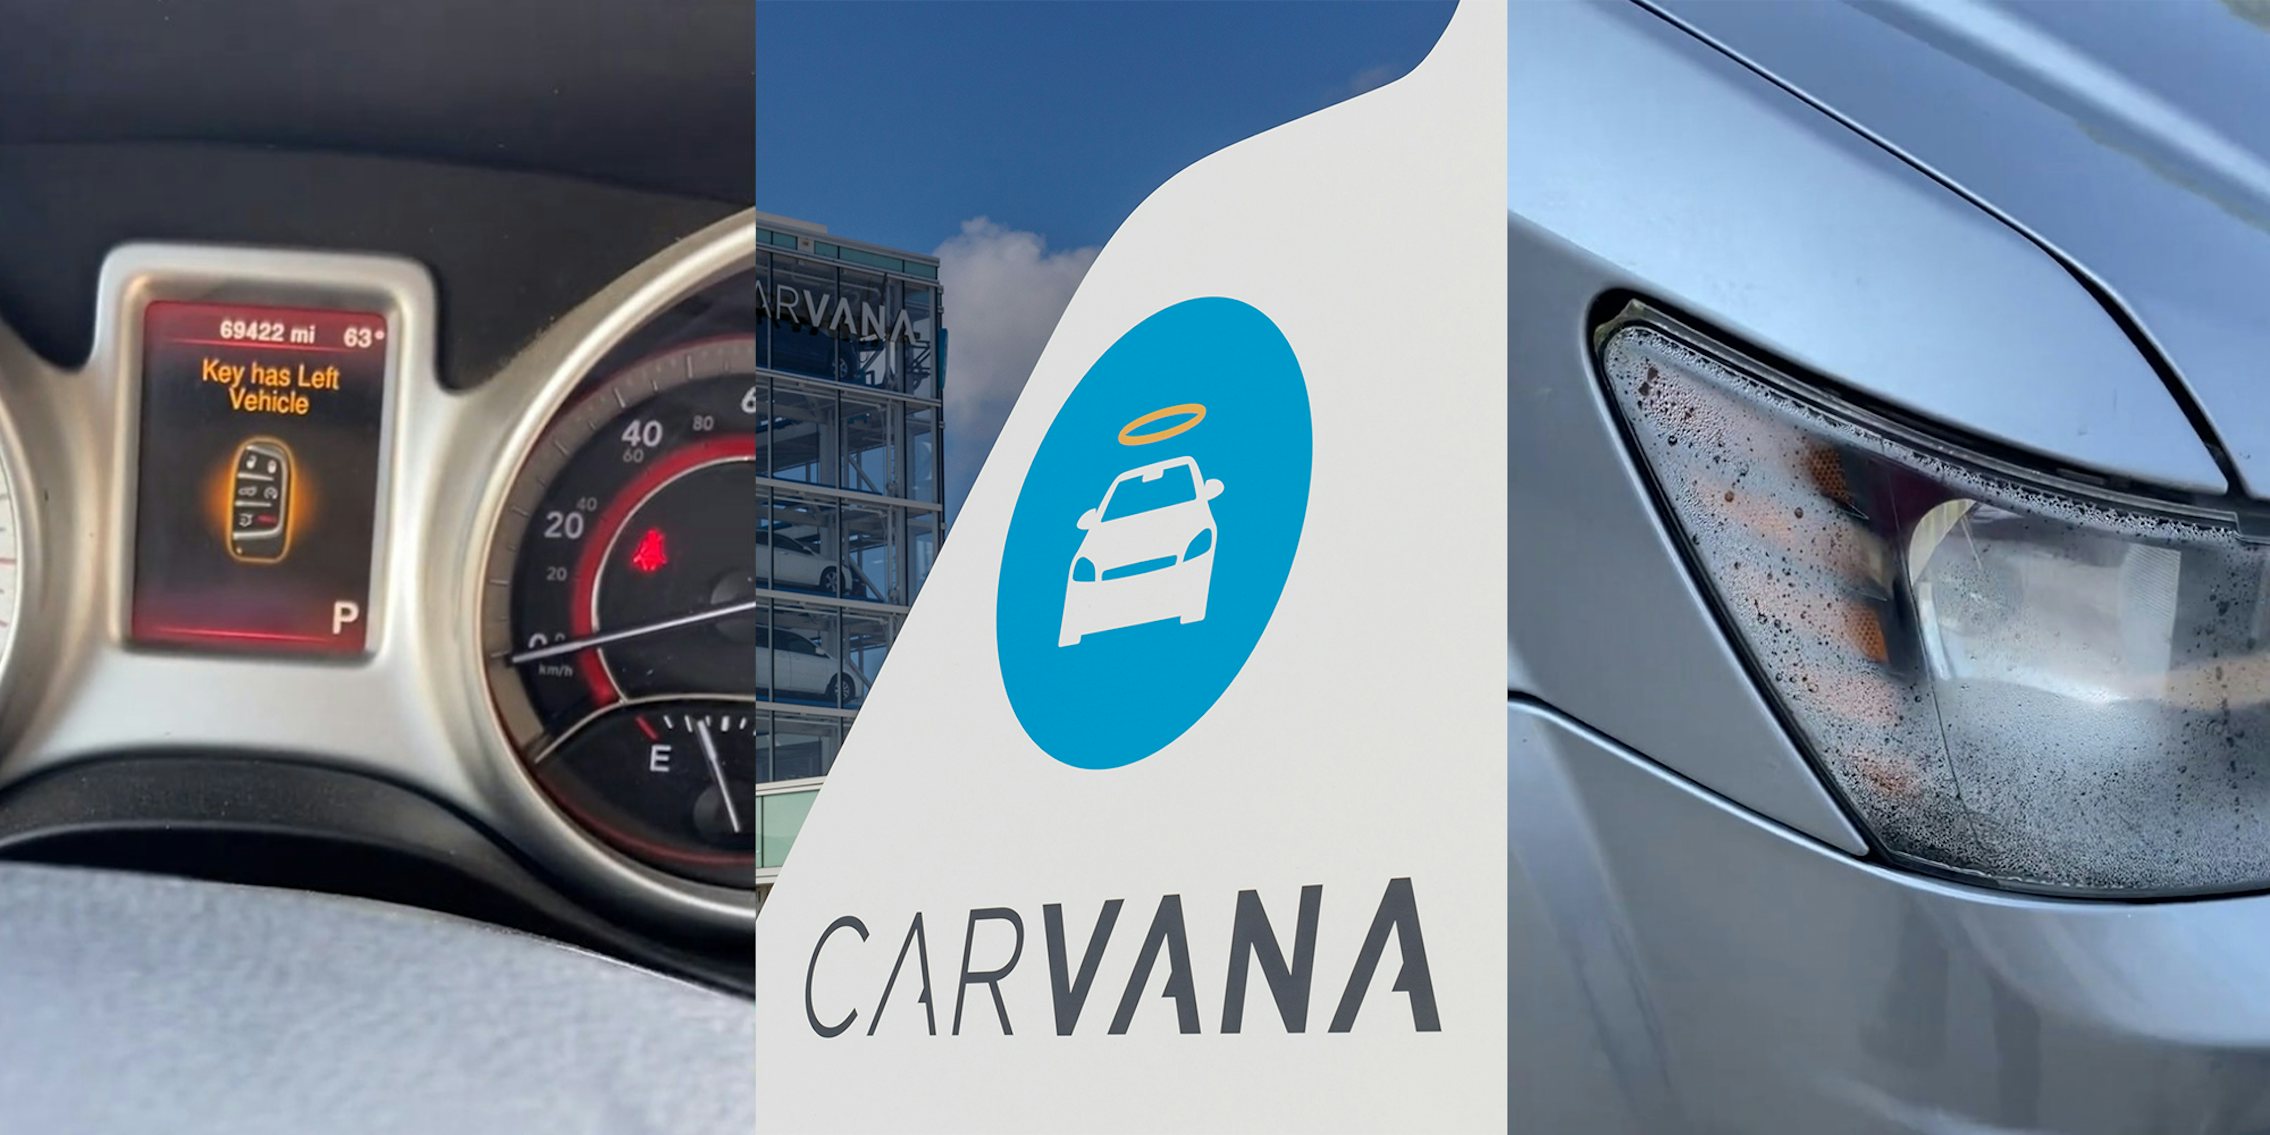 Customer claims Carvana lied about her Dodge Journey